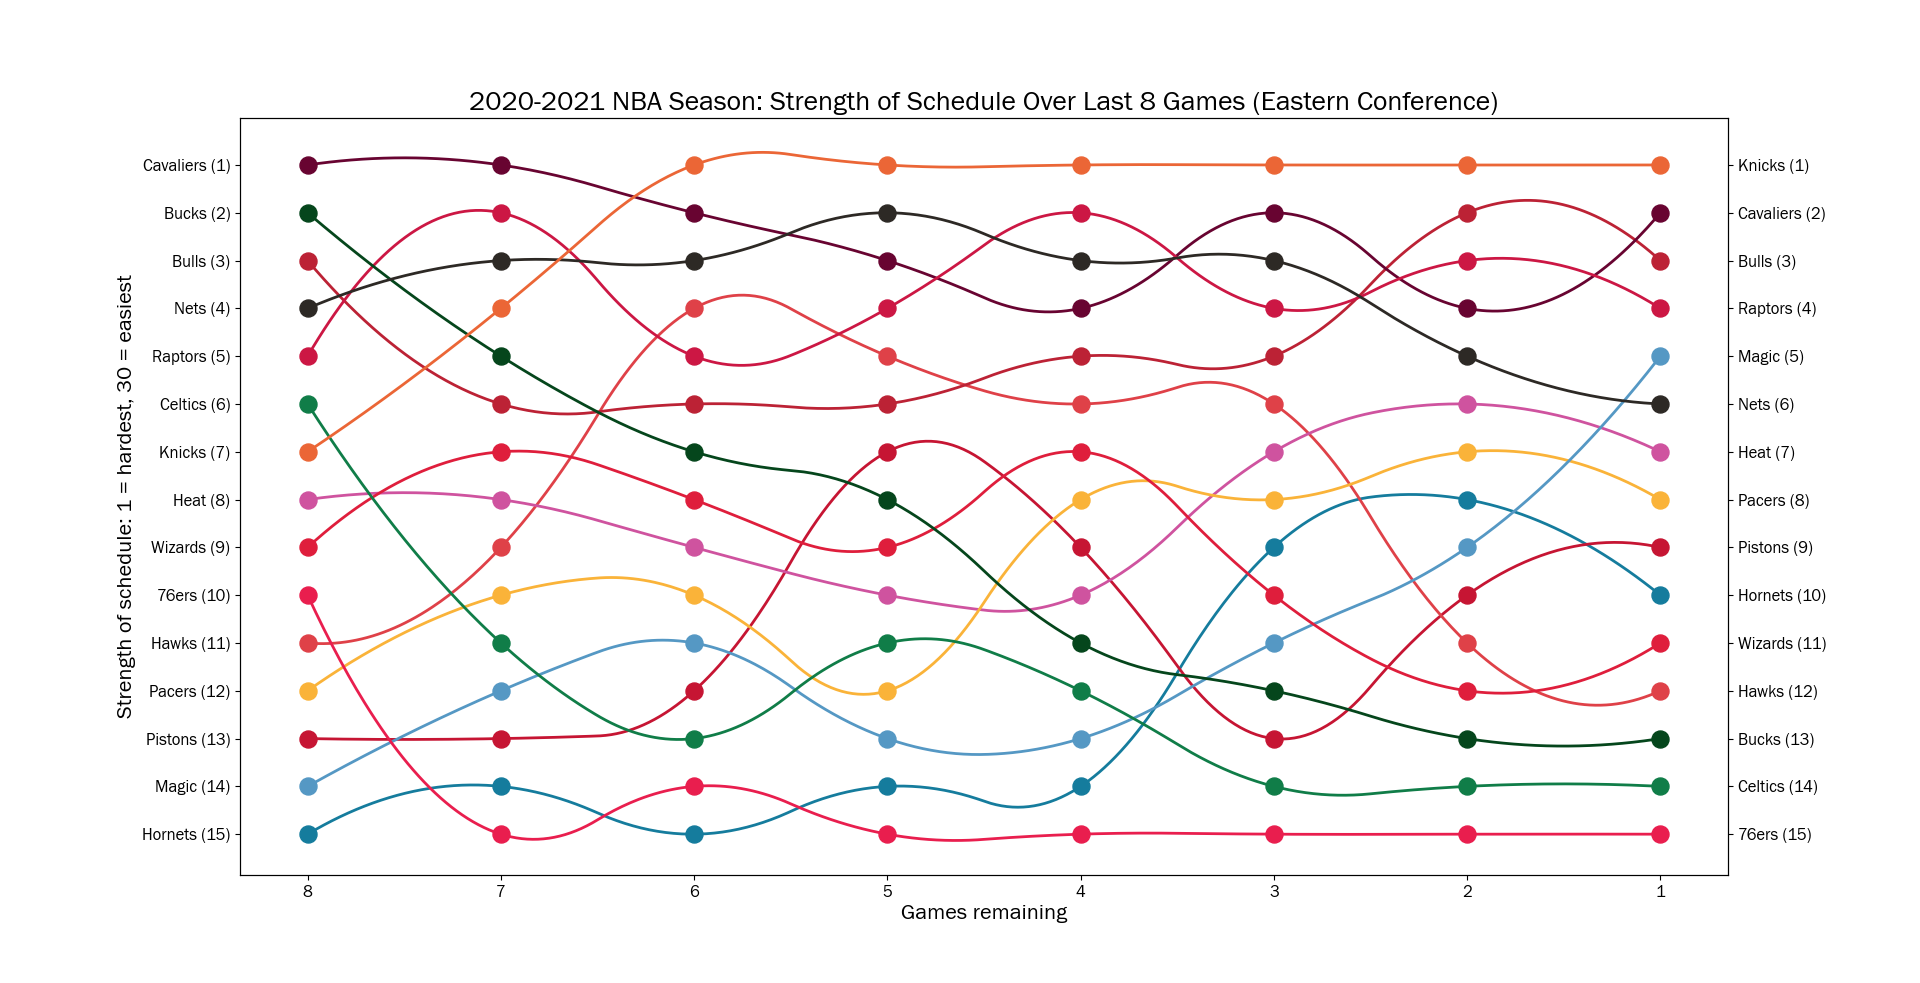 GitHub - JonEsparaz/nba-strength-of-schedule: Analyzing and visualizing the final 8 games of the